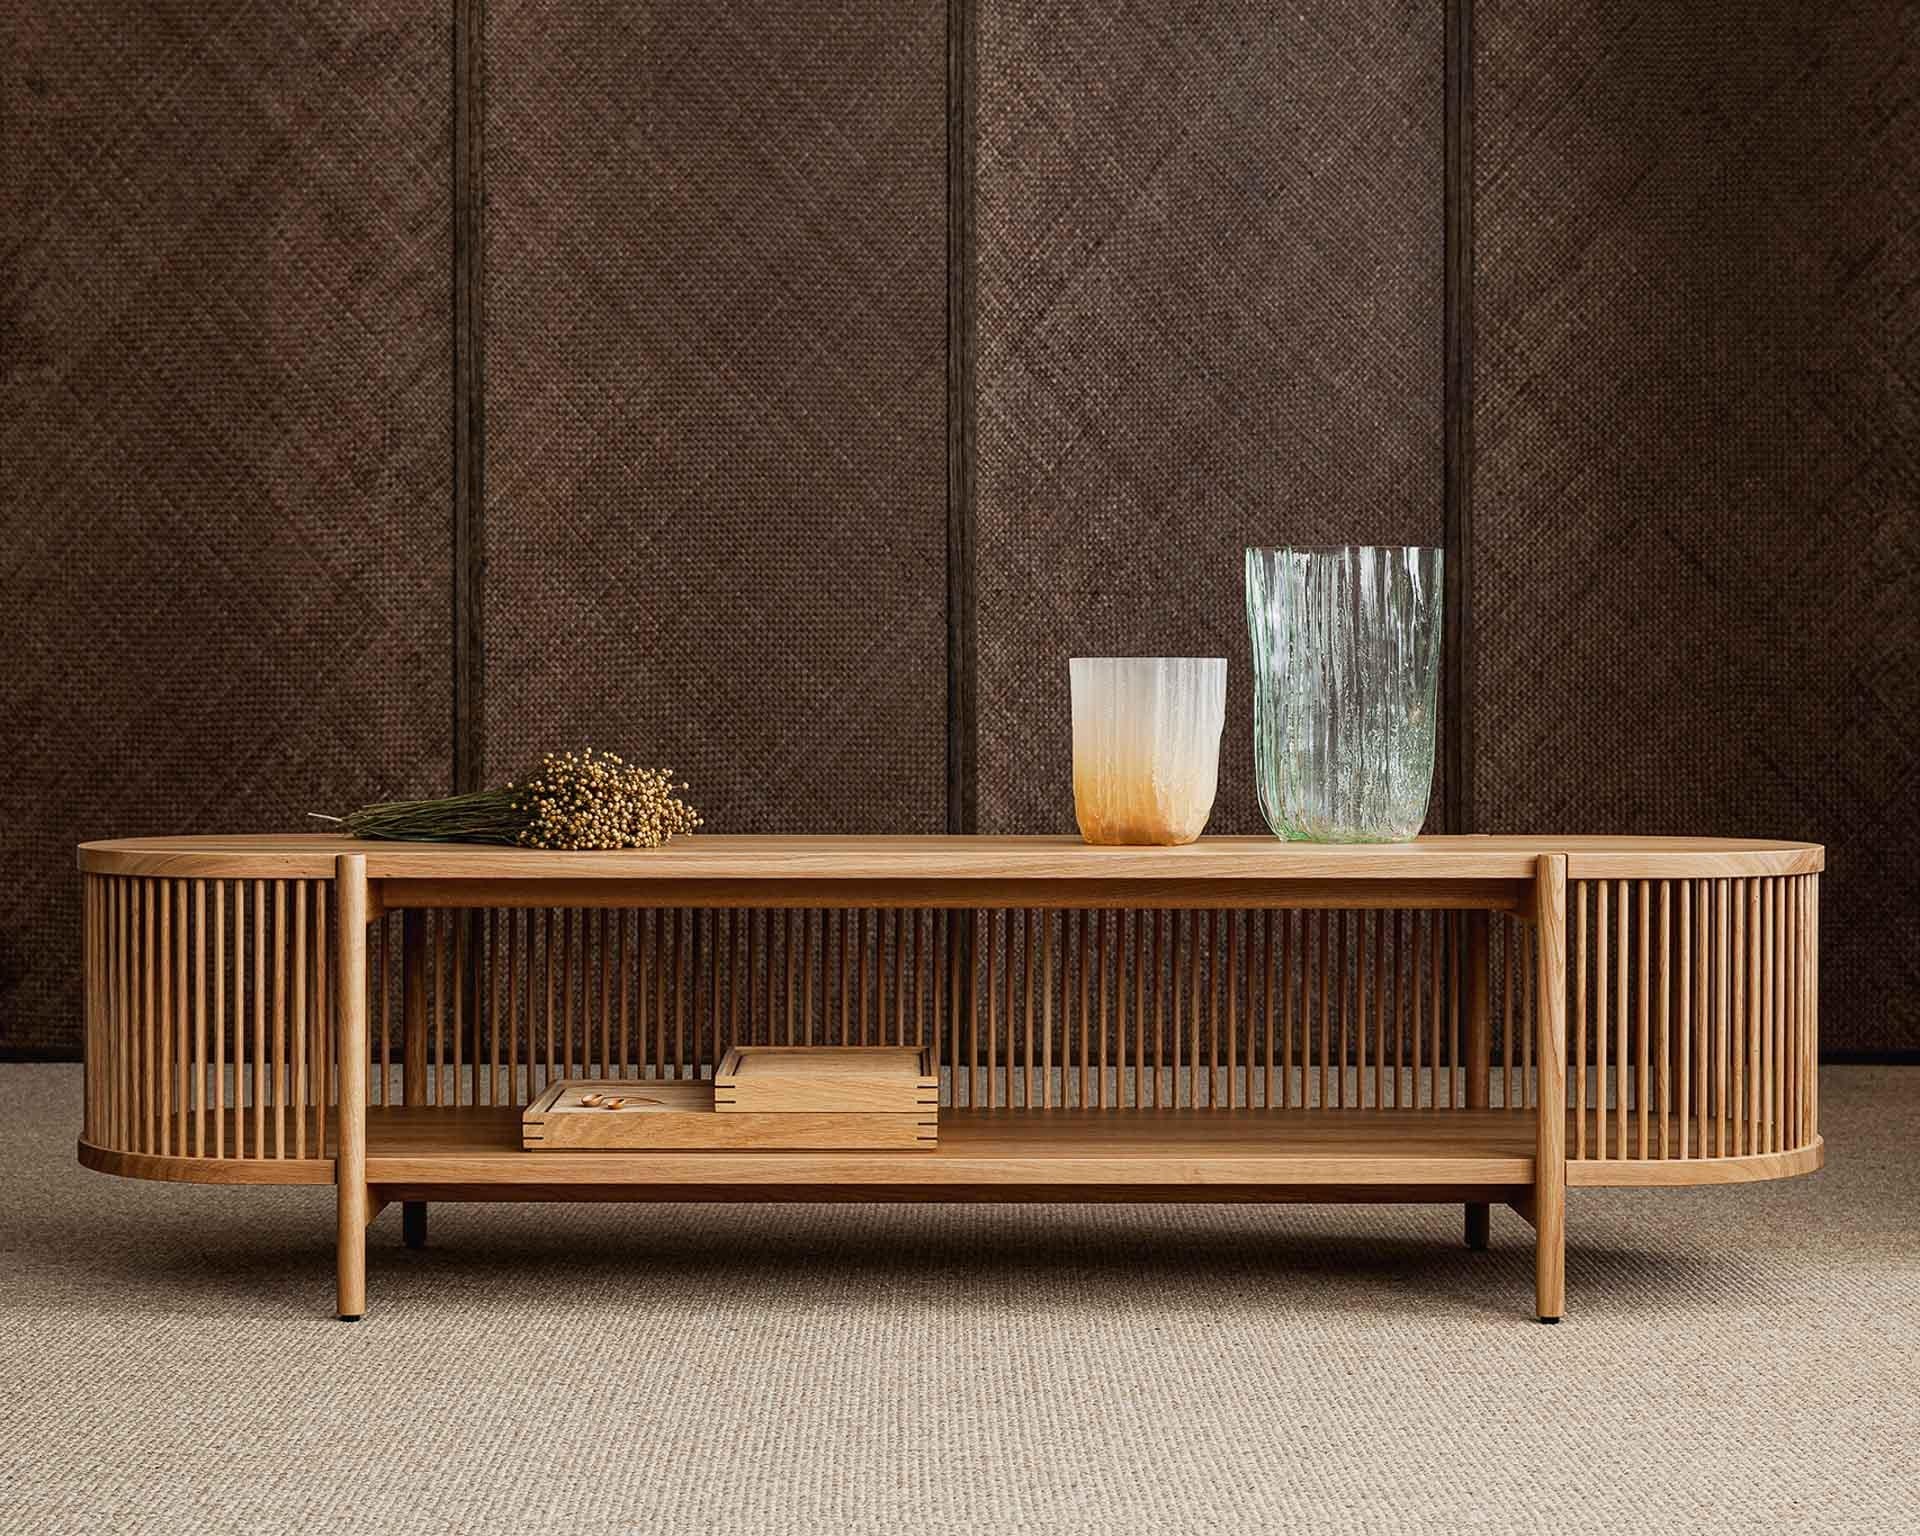 The Bastone case piece collection, which consists of a cabinet and a sideboards, is designed by the master cabinet maker and designer Antrei Hartikainen for Poiat studio. Somewhere on the boundary of art and design, the collection showcases the